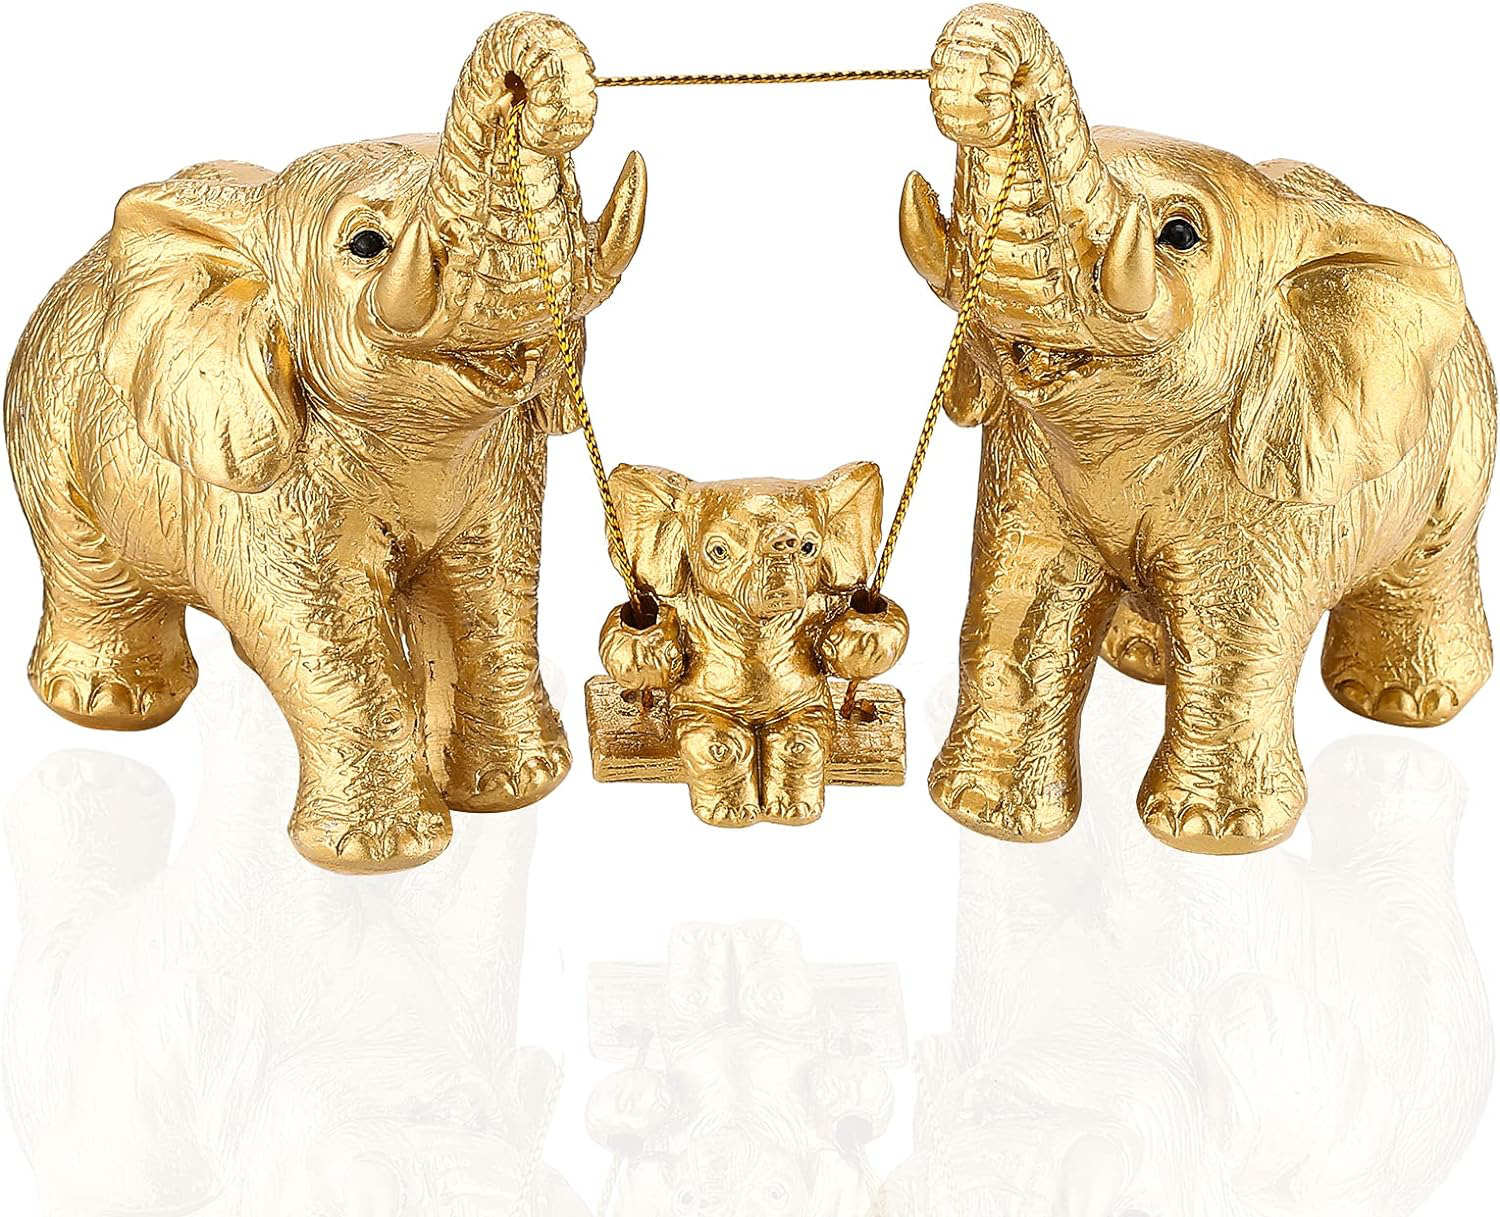 CYYKDA Elephant Statue Mom Gifts Gold Home Decor Accents Elephant Figurines for